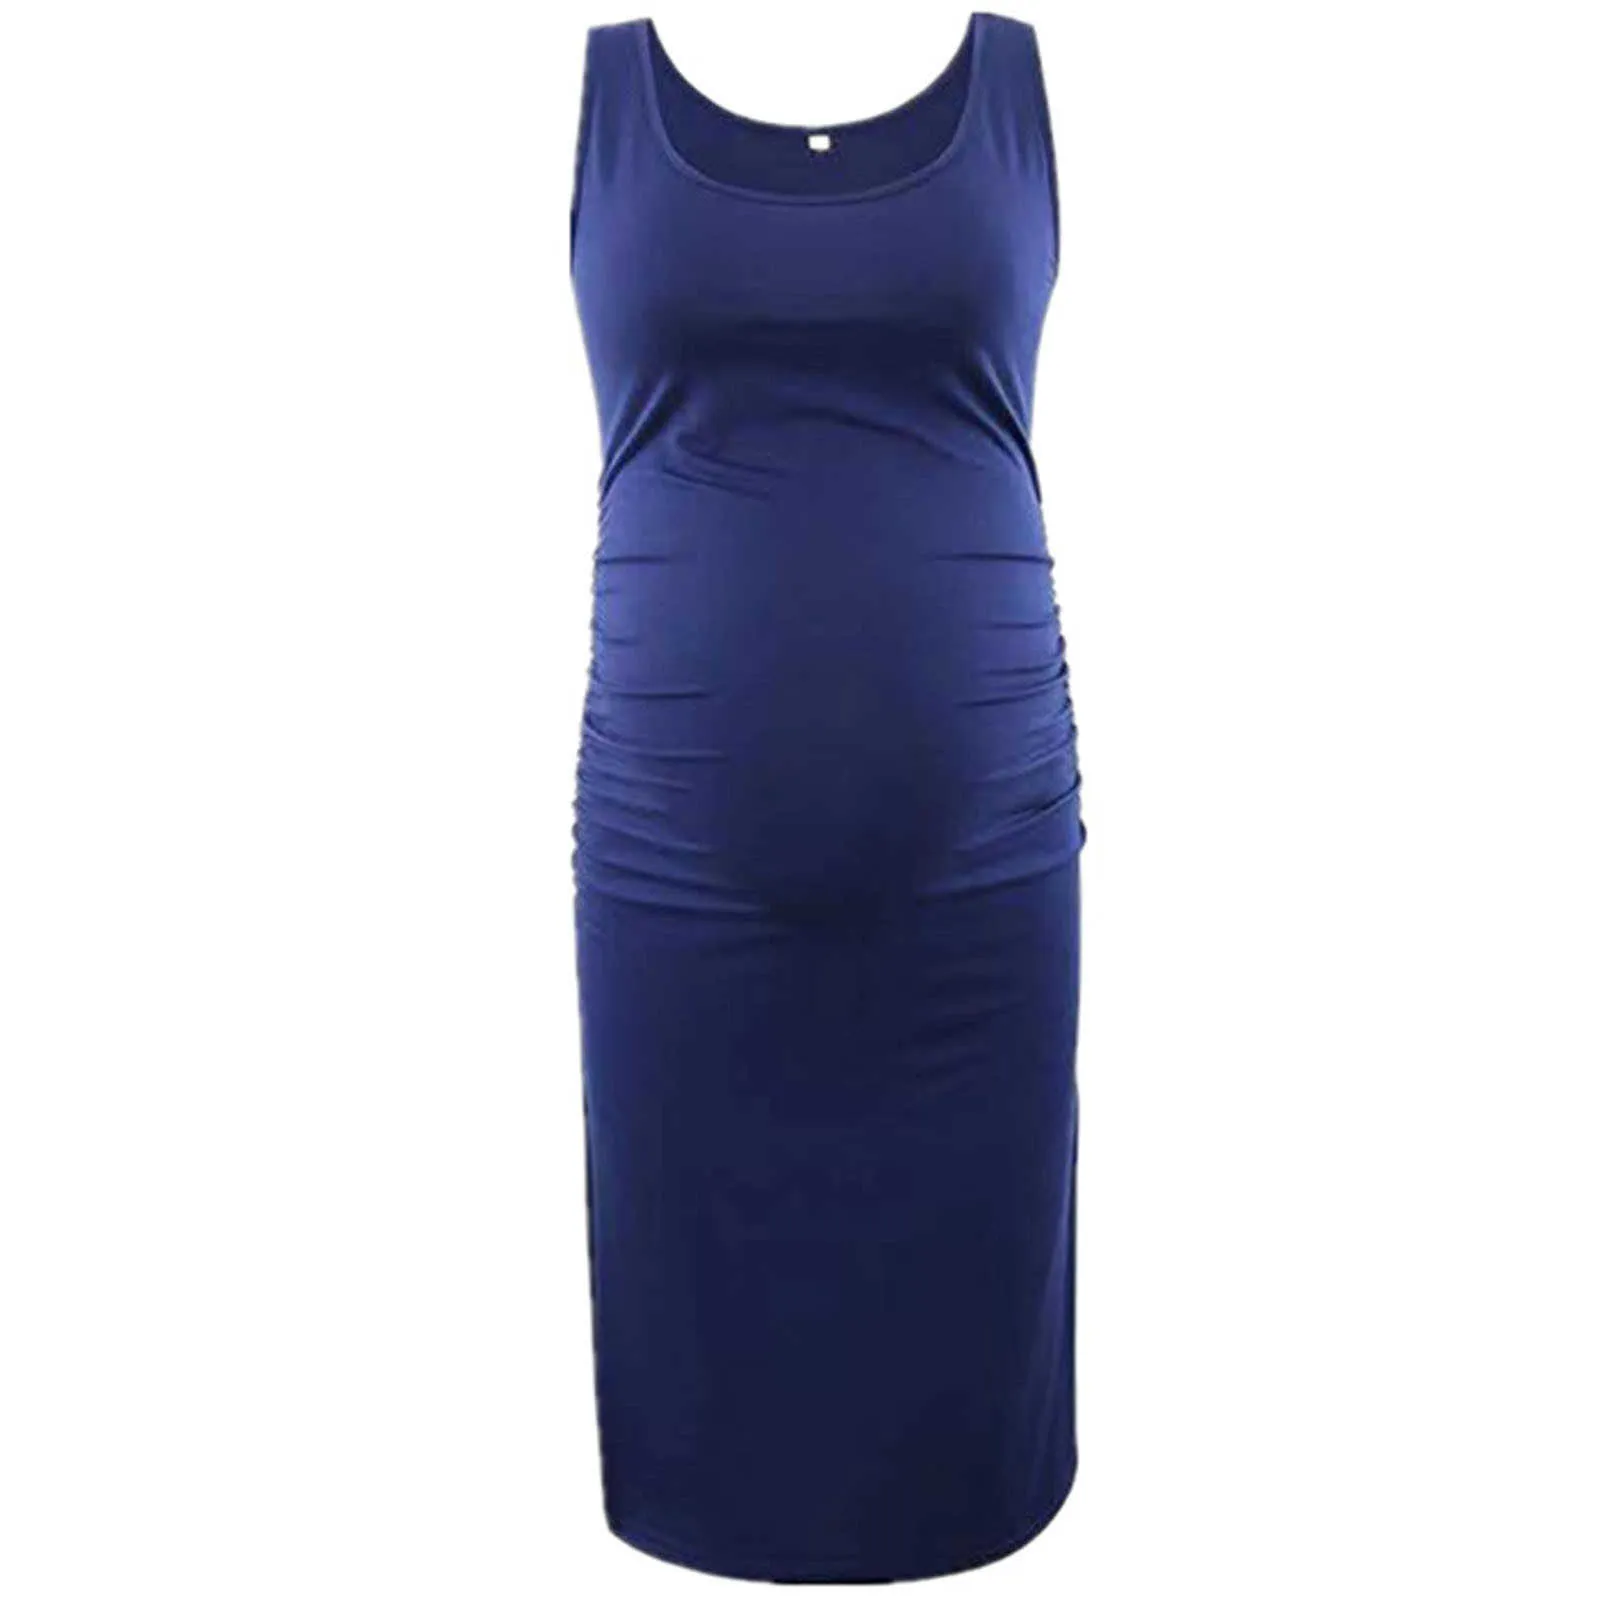 * Casual Solid Maternity Women Dress Sleeveless Square collar Pregnancy Dresses Mama Clothes Pregnant Womens Clothing robe femme Y0924